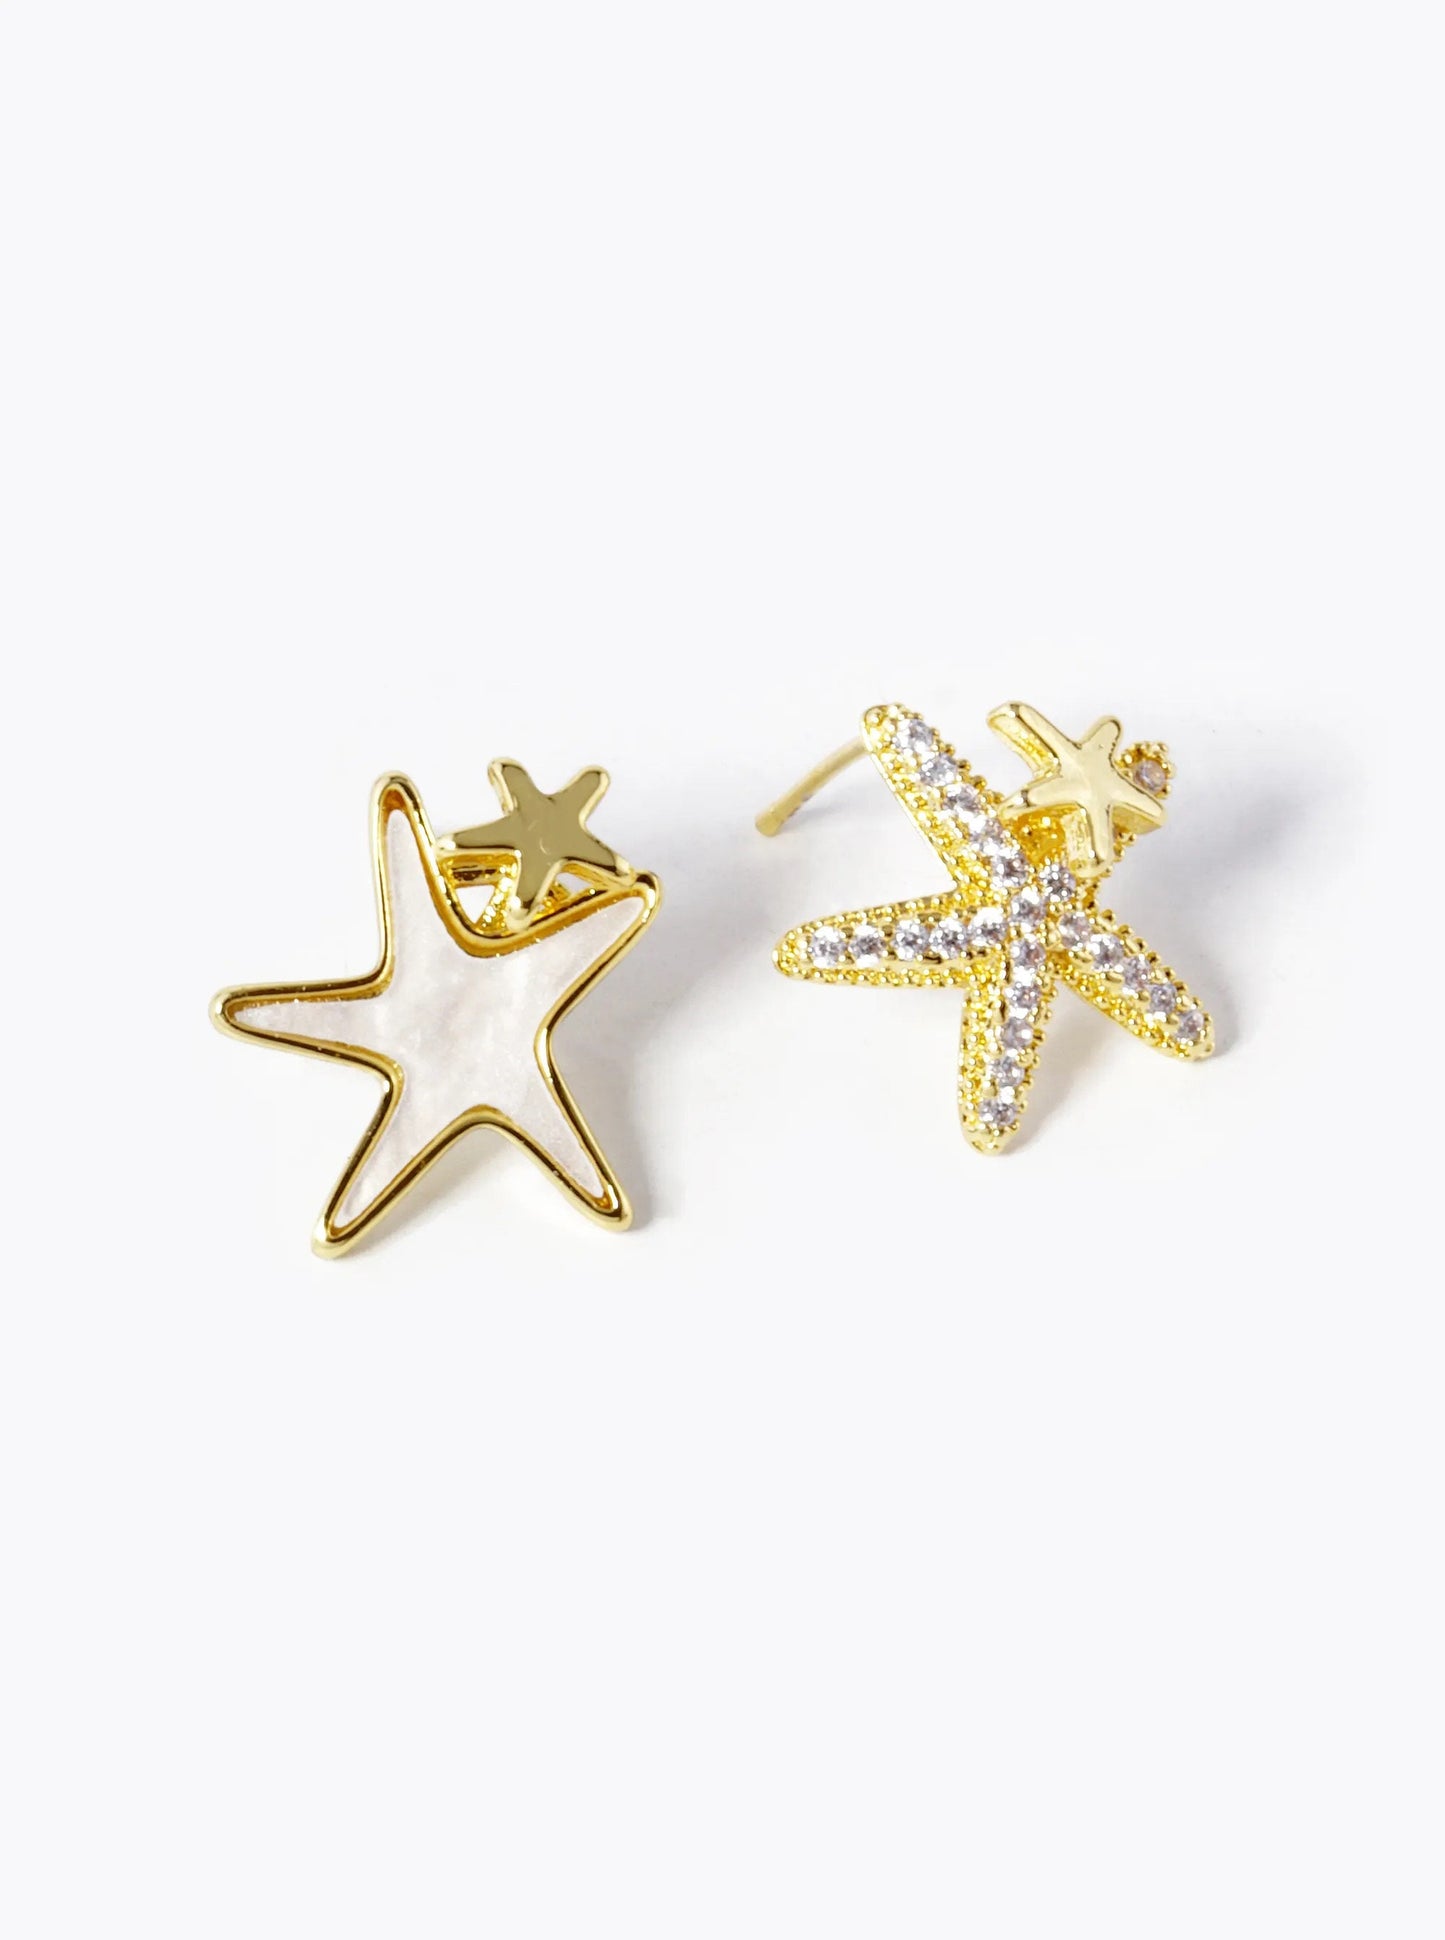 18k Gold  Mother of Pearl Starfish Stud Earrings, Gift for her, Gold earrings, Silver earrings